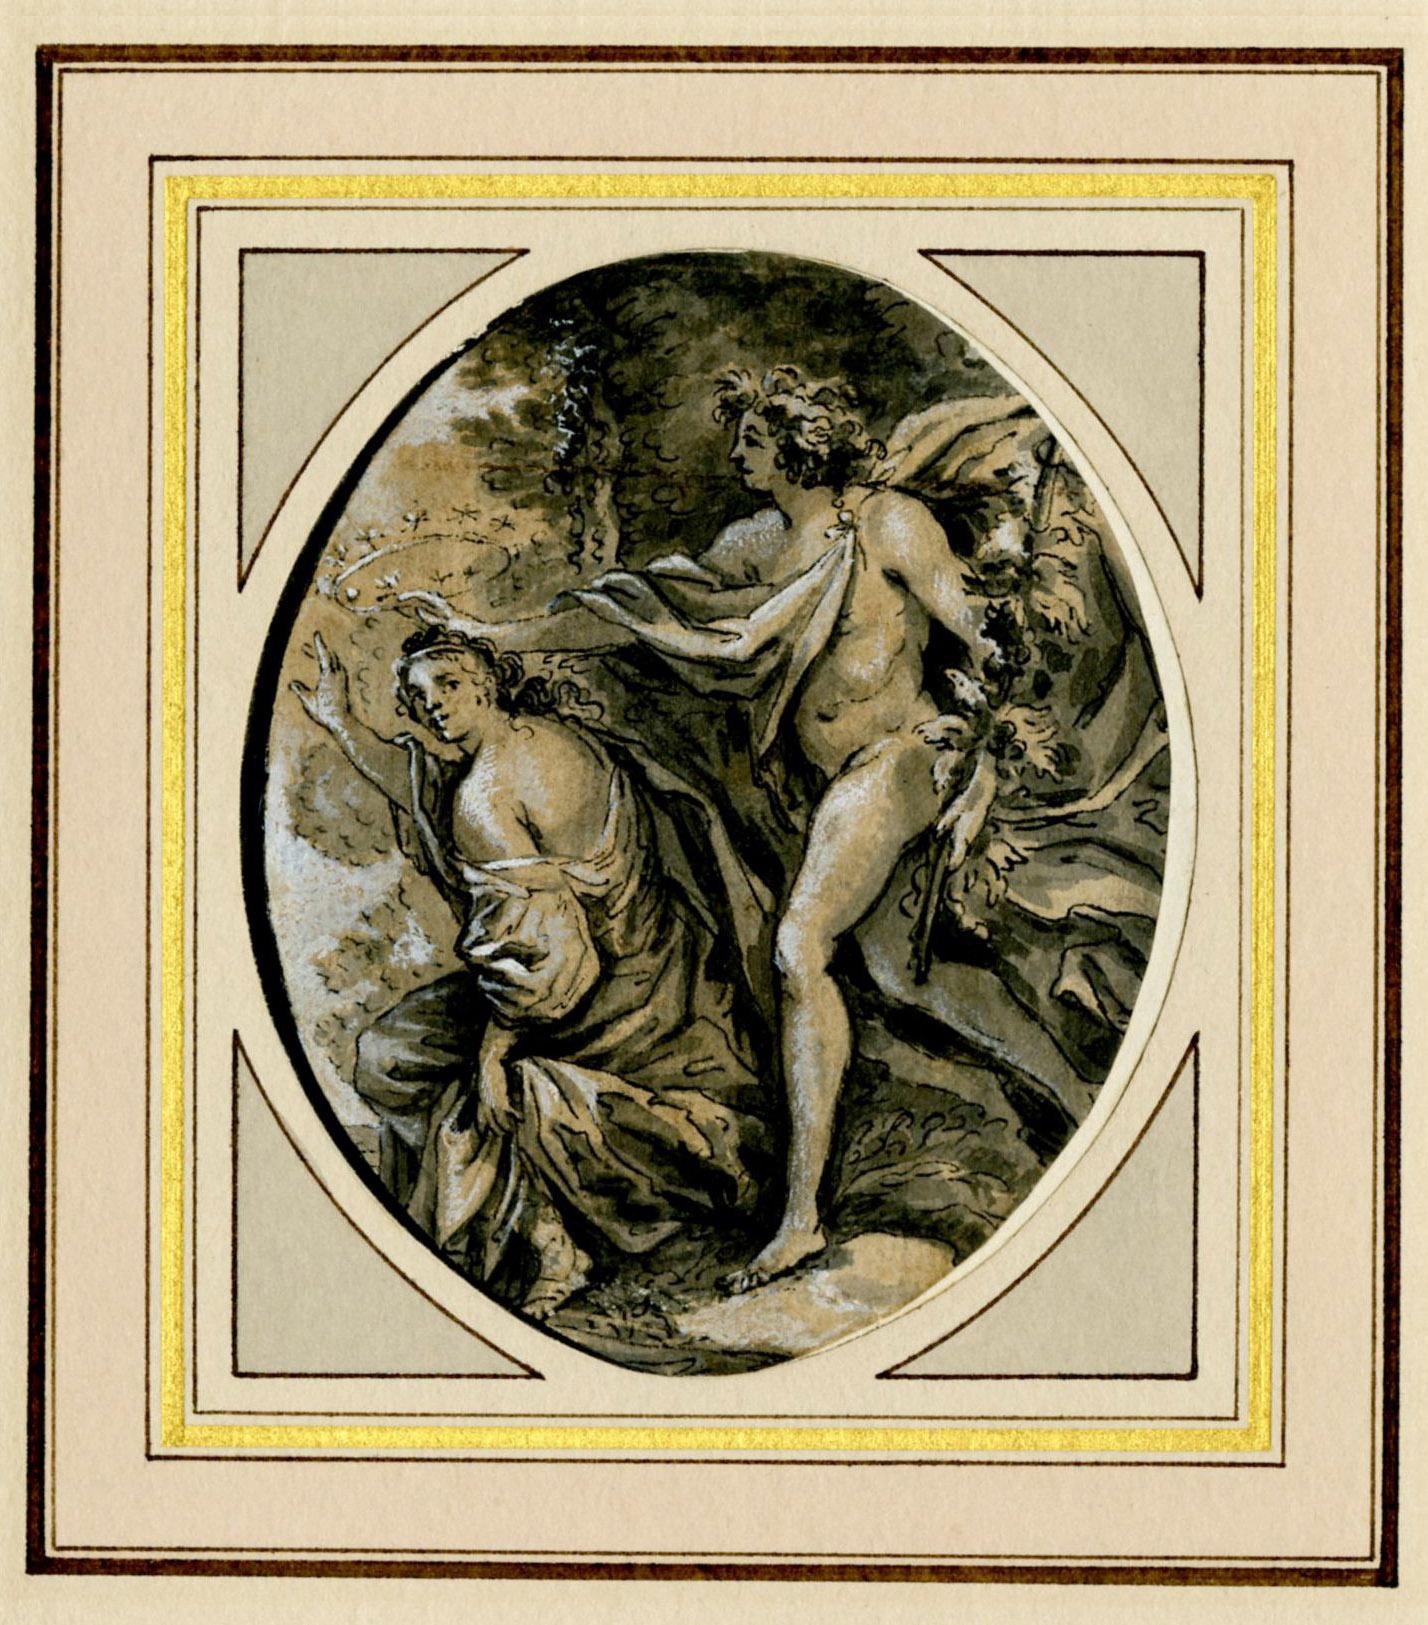 A pair of oval drawings for Ovid, Metamophoses
Left: The Triumph of Amphitrite (Book  I)
Right: Diana and Actaeon (Book III)
From: Ovid, Metamophoses
These mythological studies are after paintings by Simon Vouet (1590-1649) that decorated the